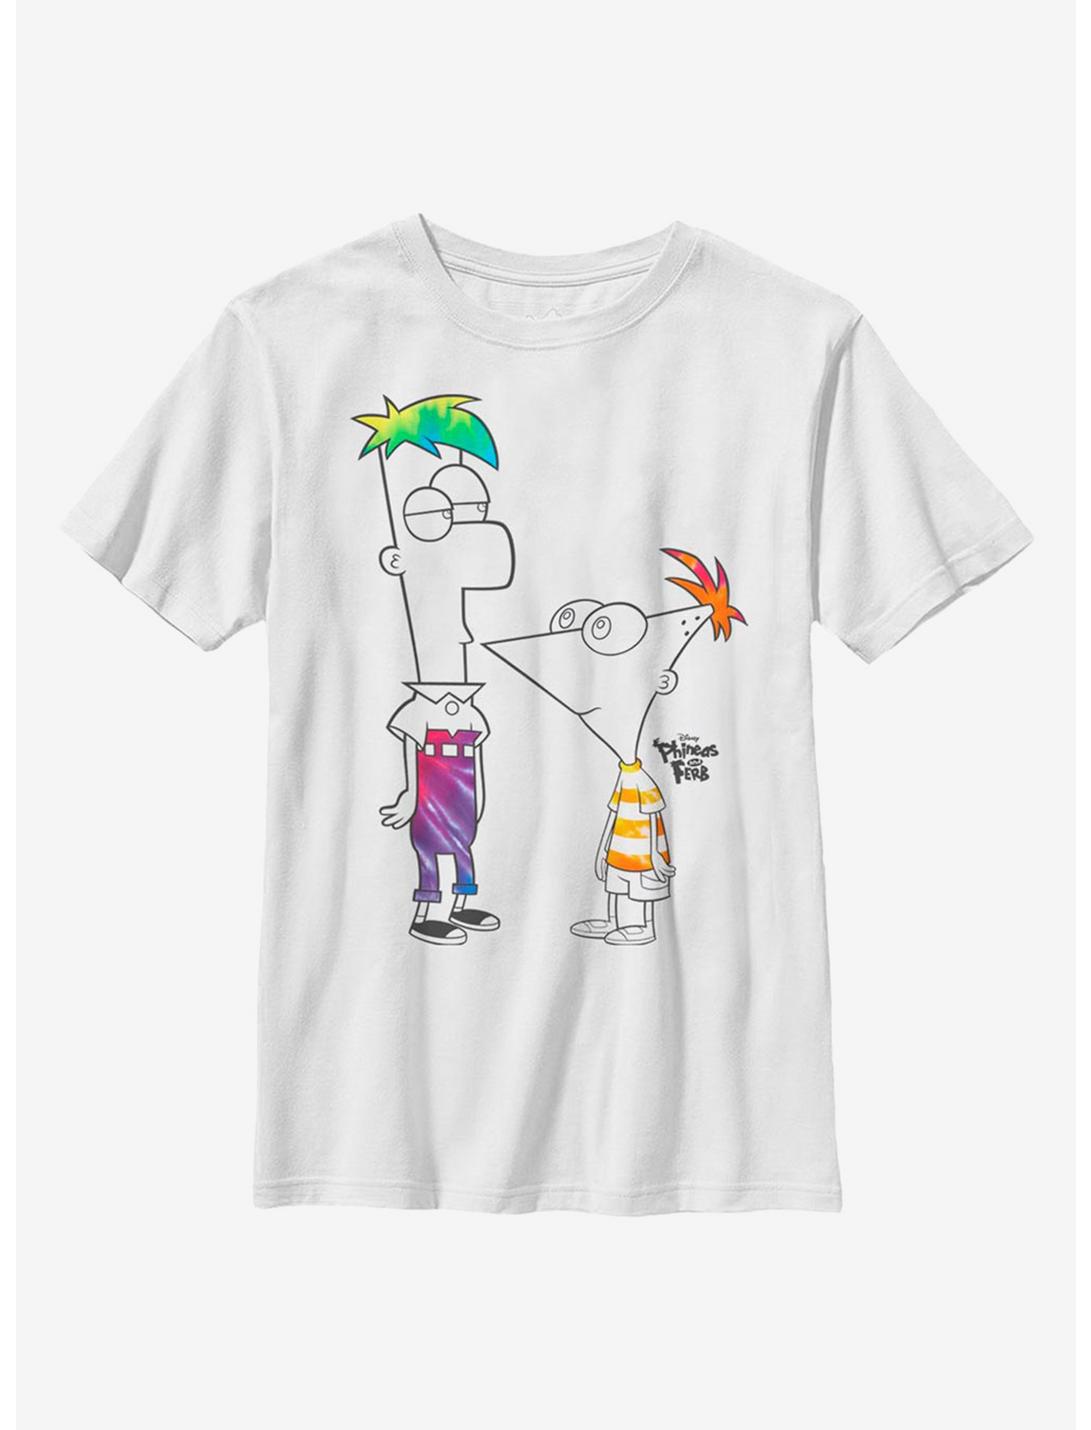 Disney Phineas And Ferb Boys Of Tie Dye Youth T-Shirt, WHITE, hi-res